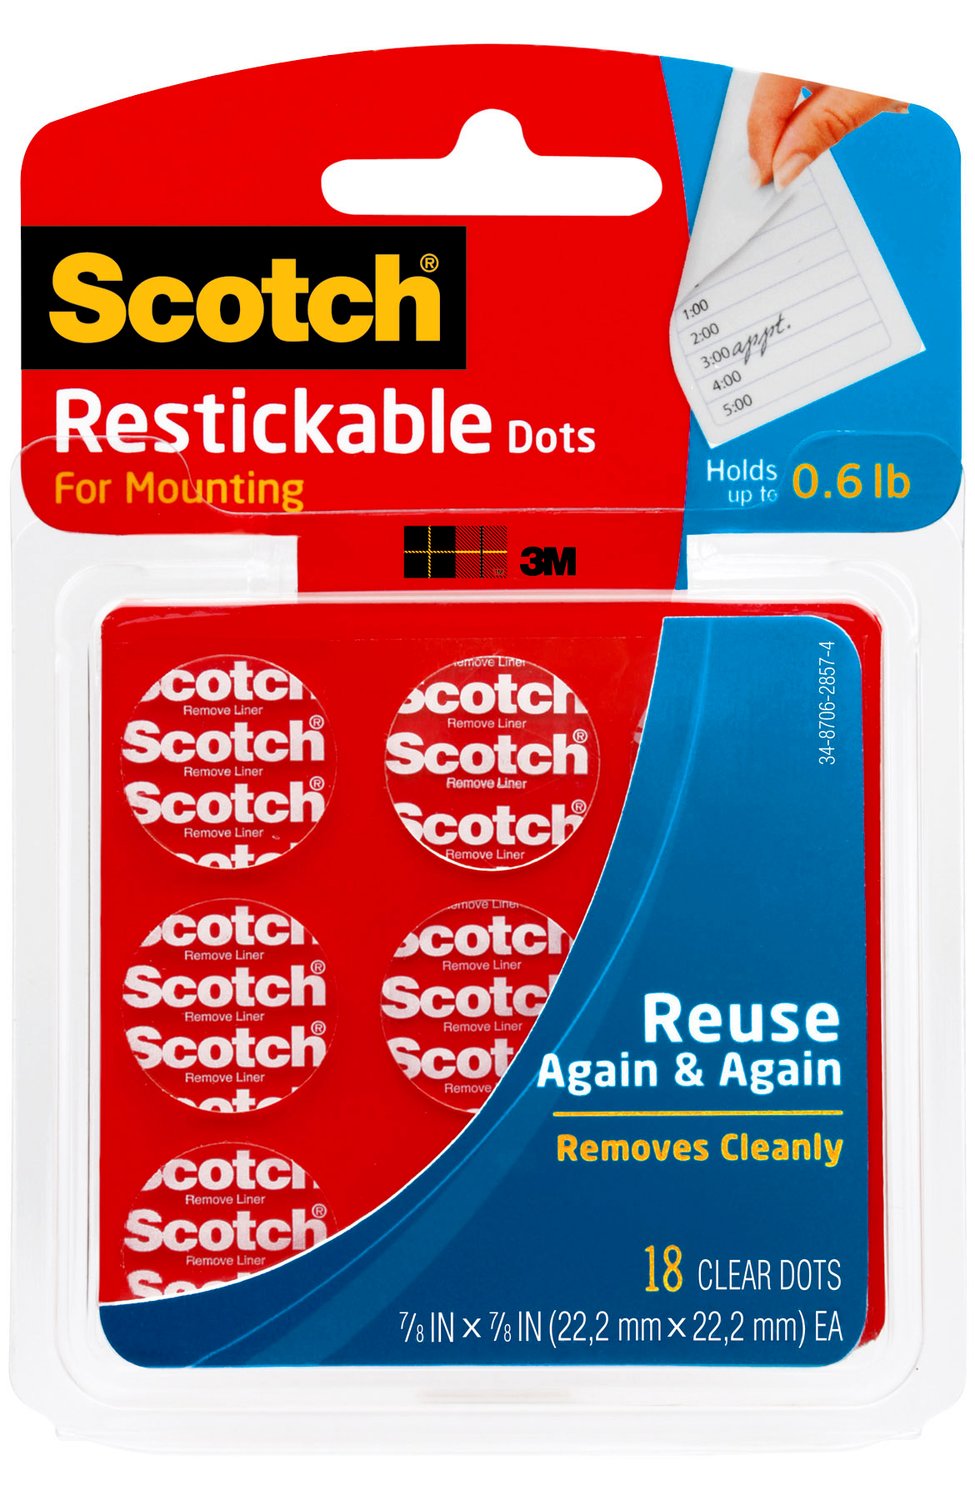 7000047805 - Scotch Restickable Dots R105, 7/8 in x 7/8 in (22,2 mm x 22,2 mm)